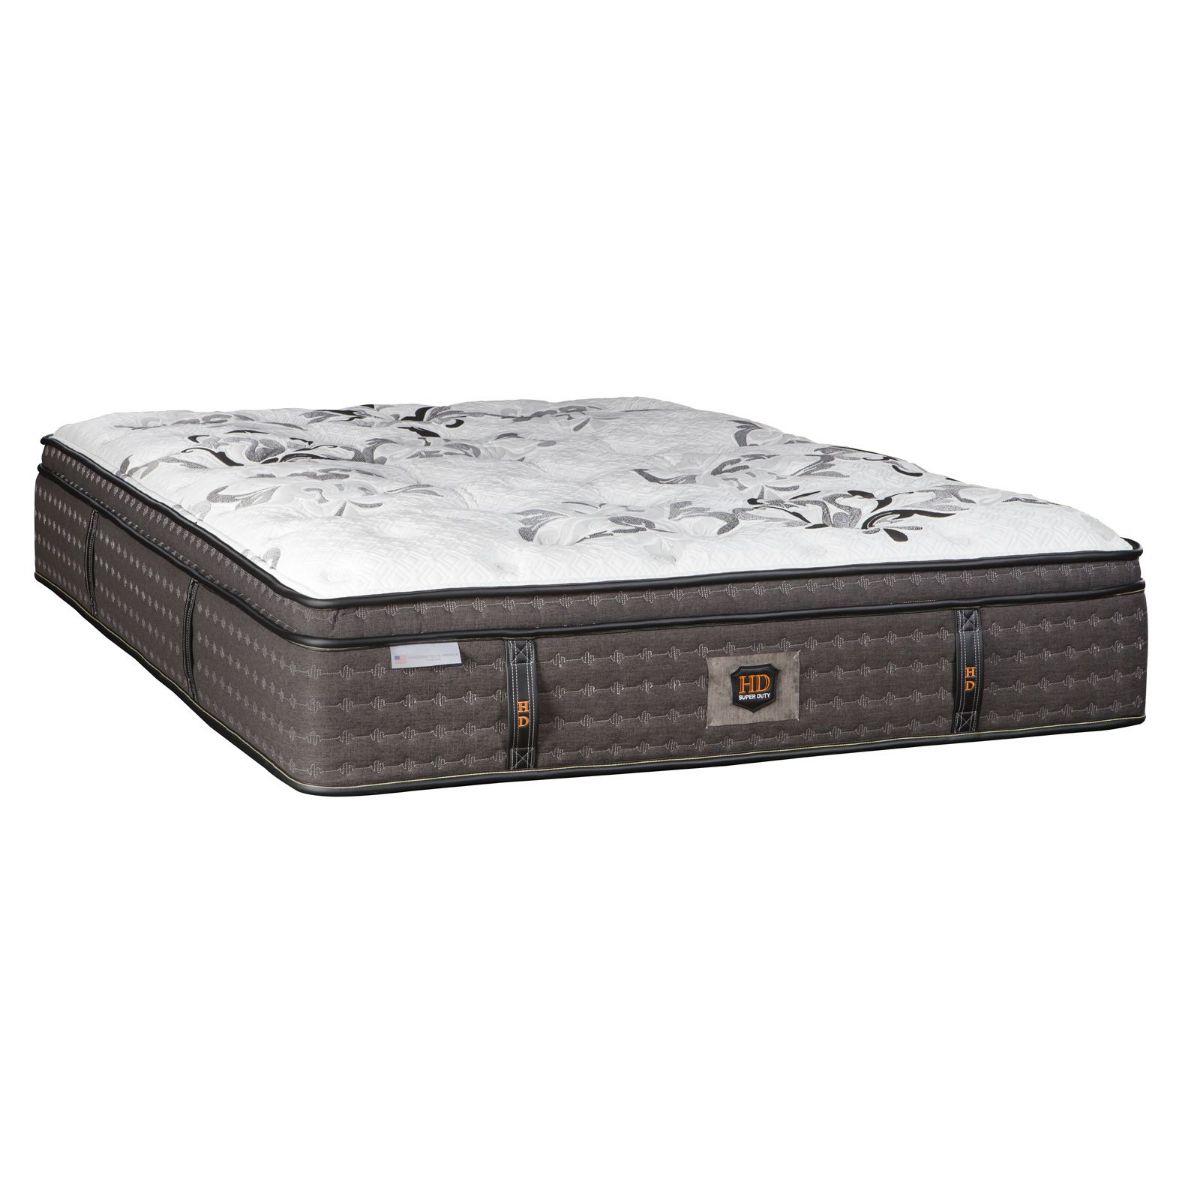 Picture of King Olive Euro Top Mattress